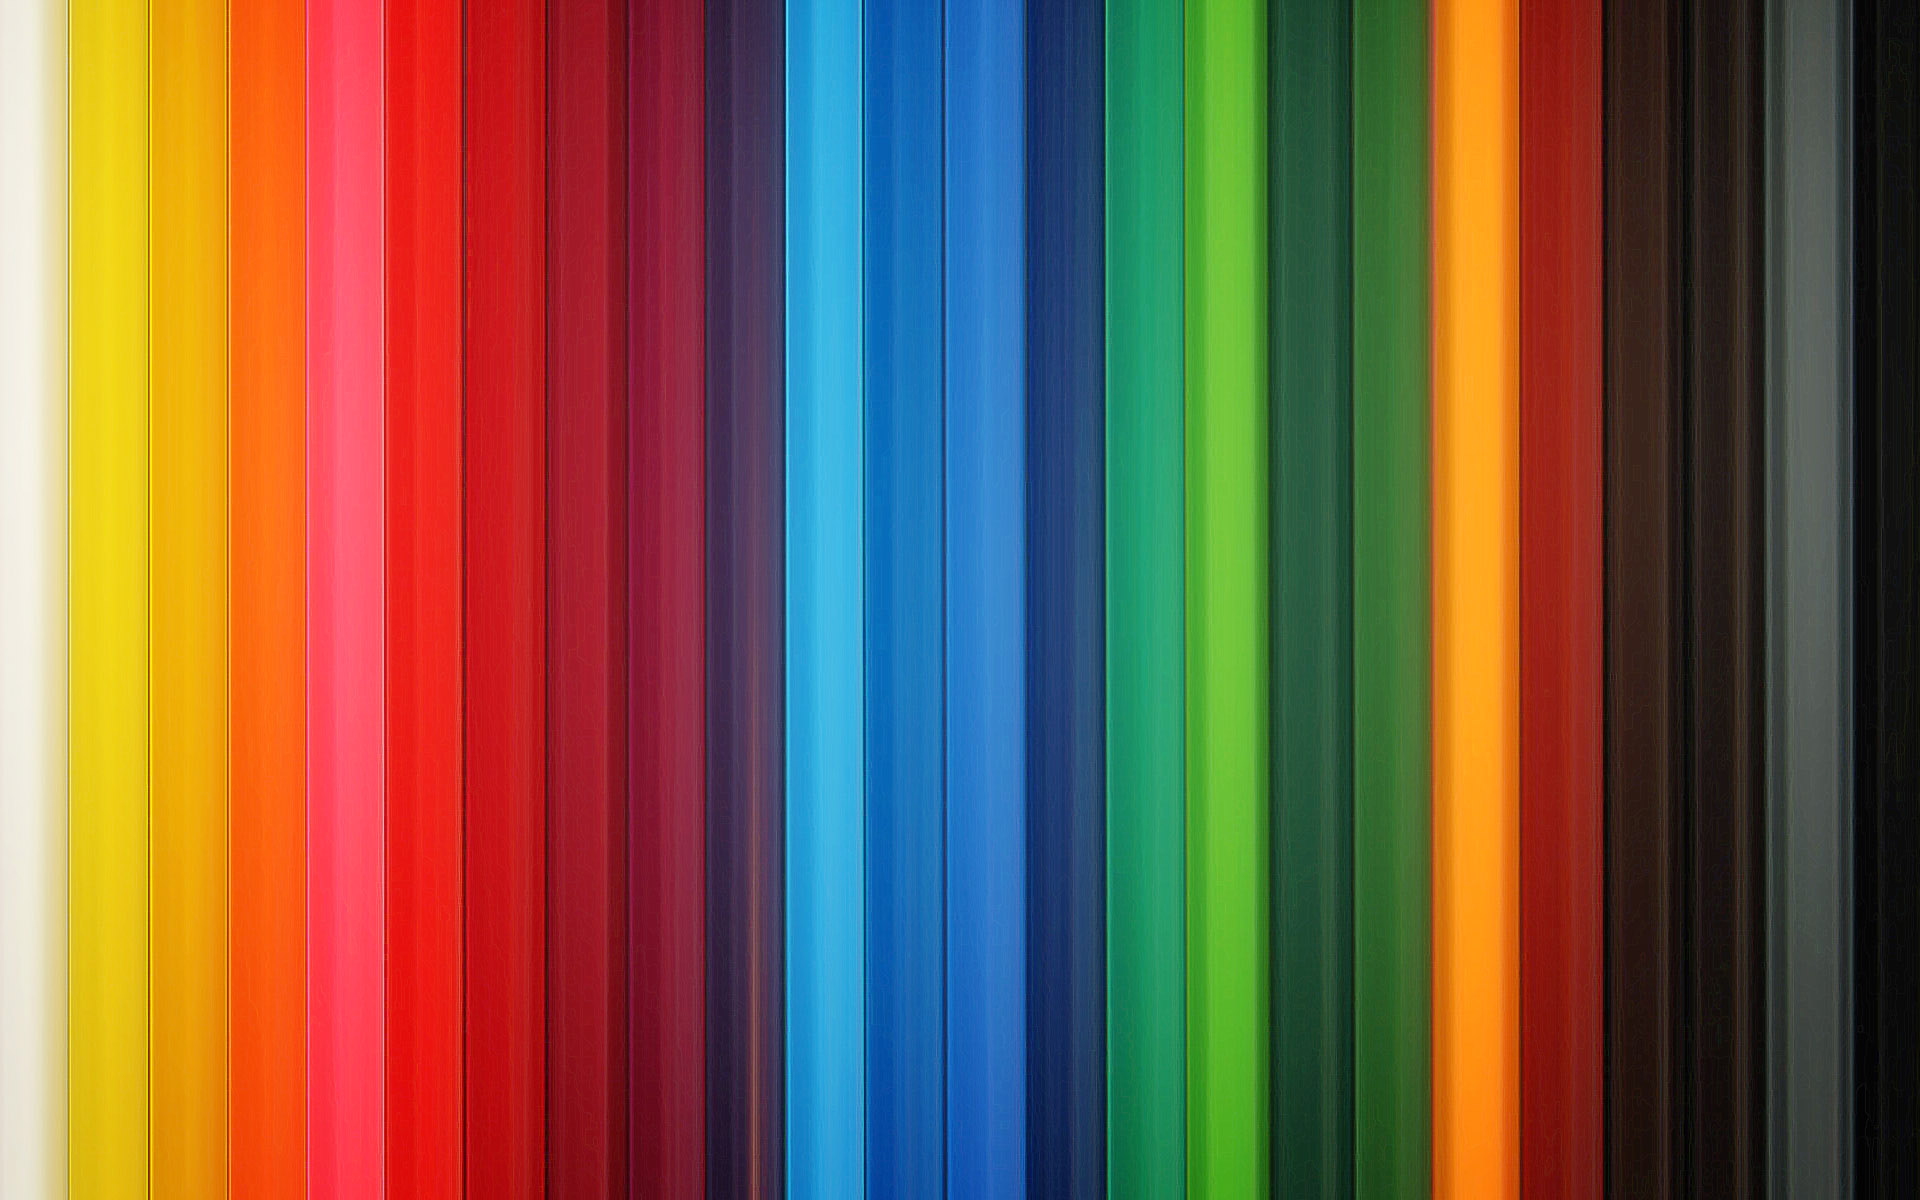 Computer Wallpapers, Desktop Backgrounds Colorful, 279.93 KB | ID ...